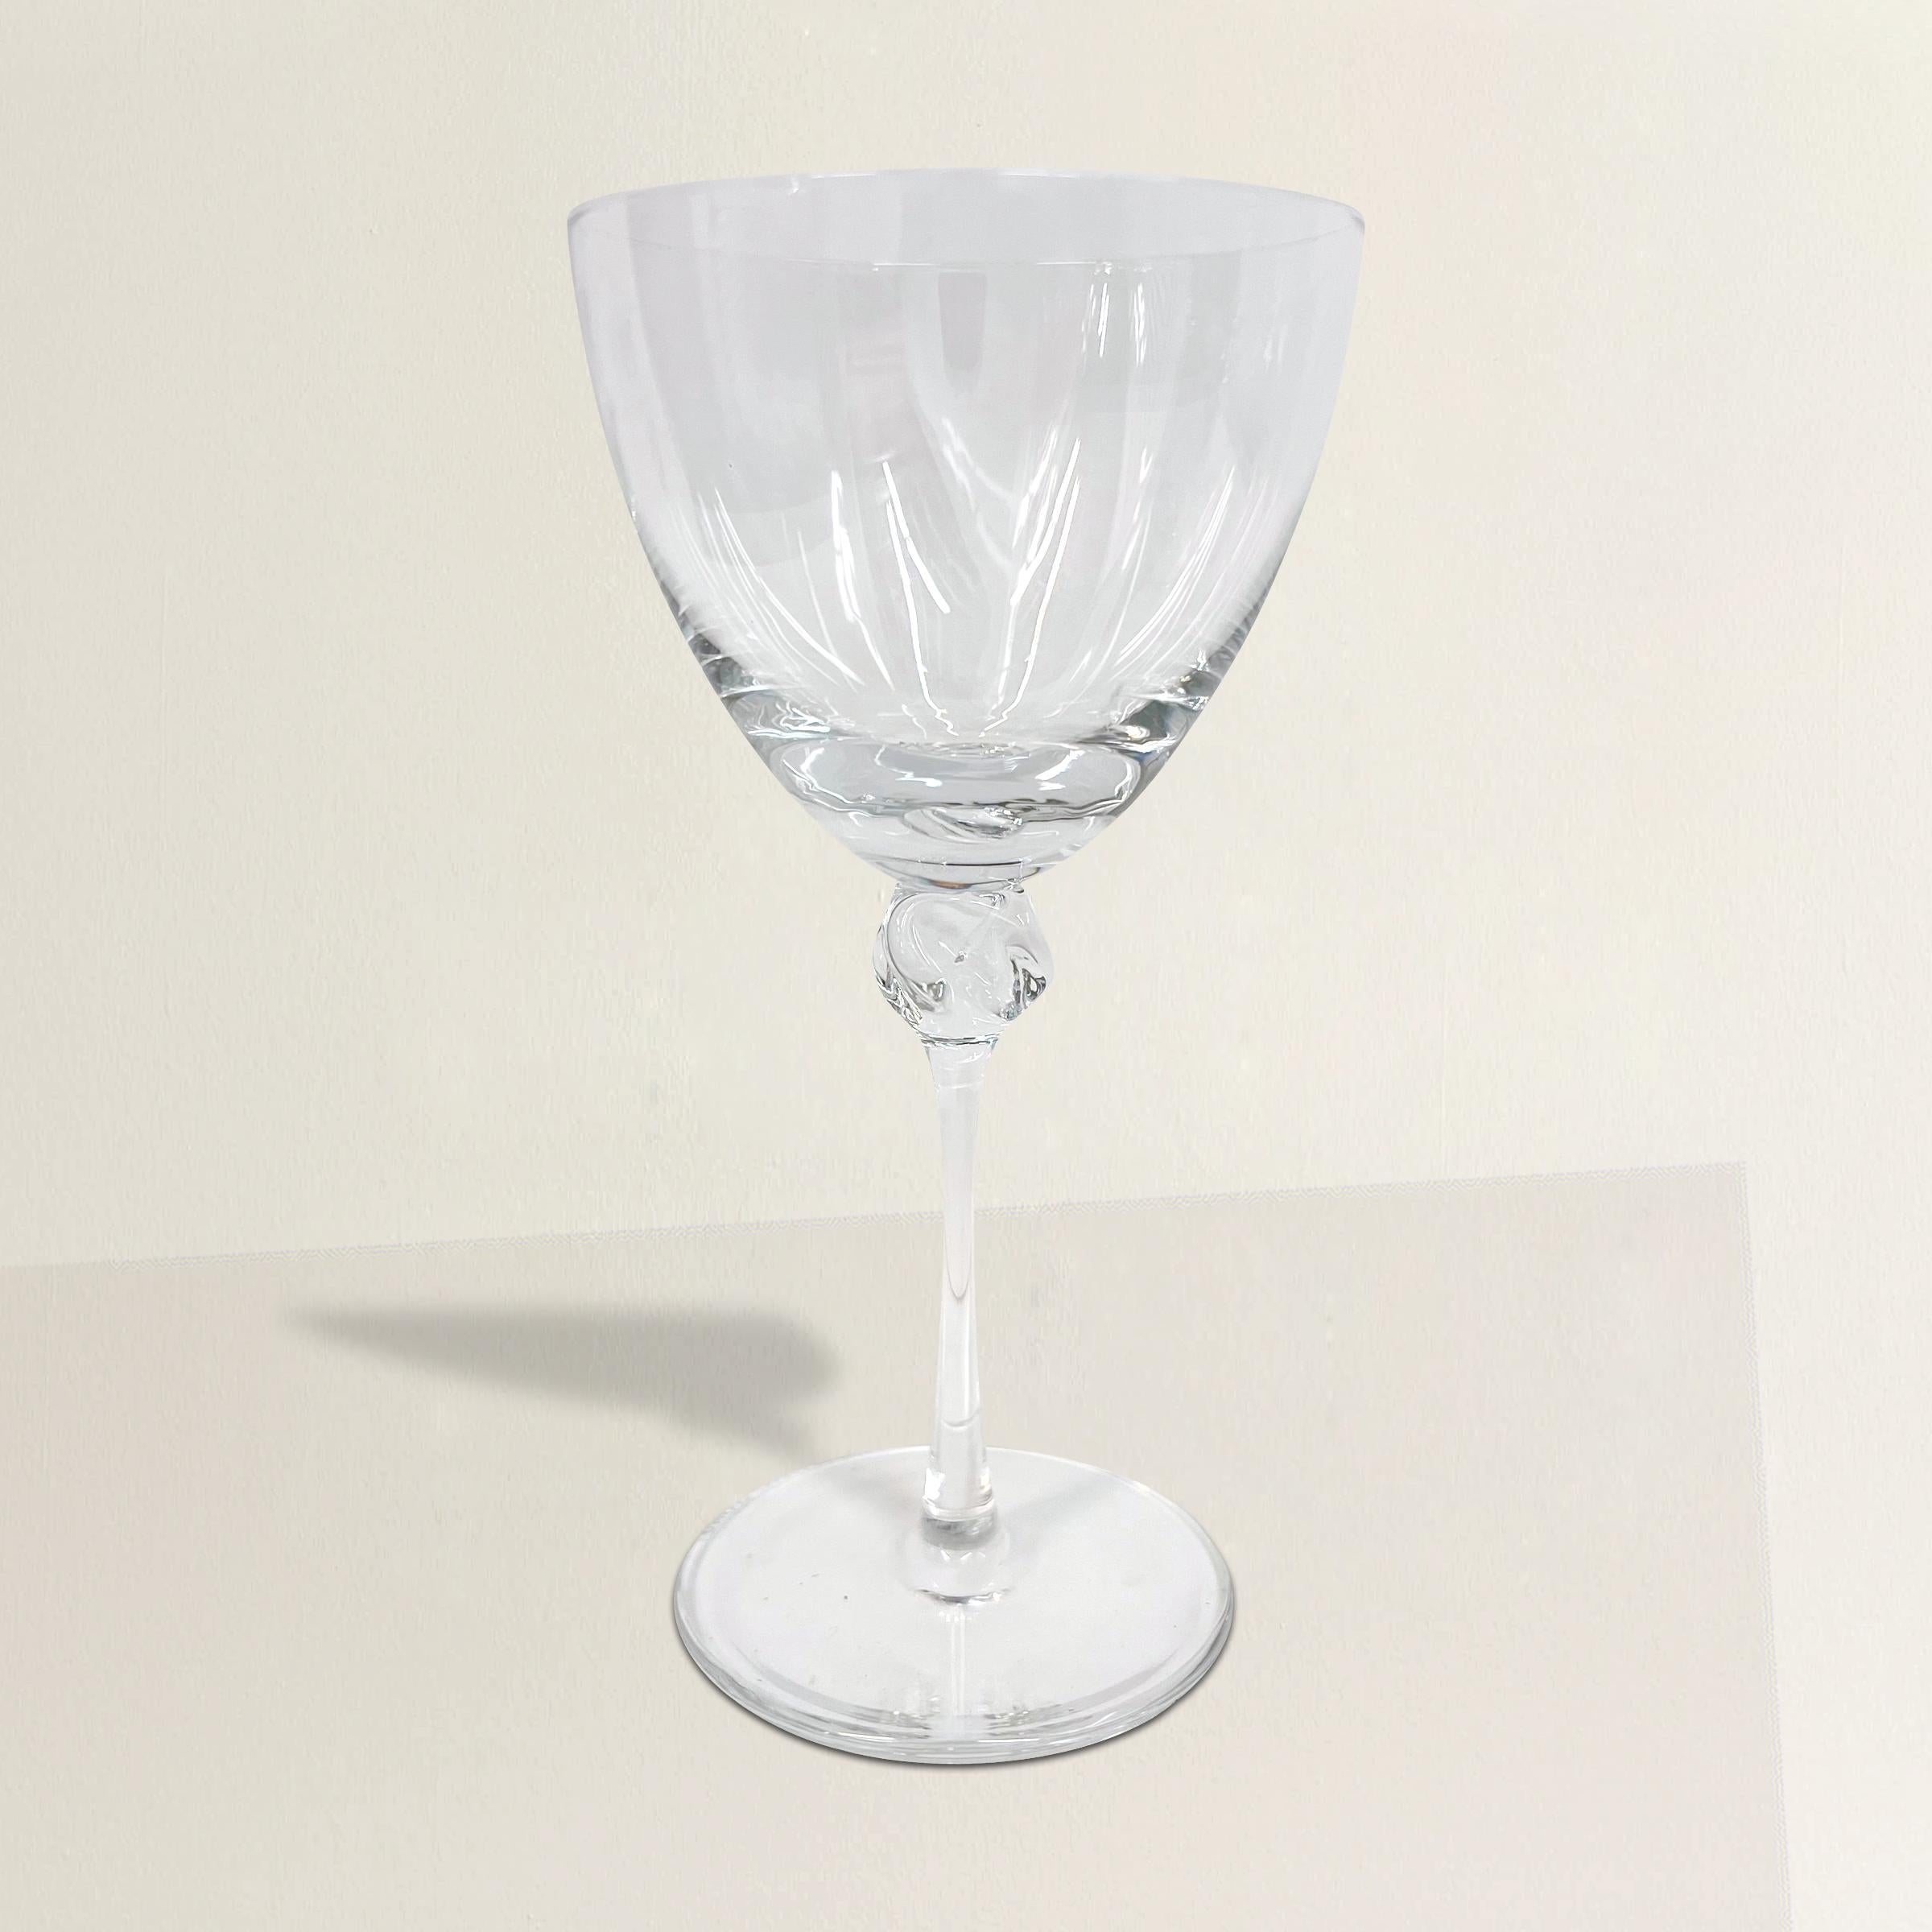 A chic and sophisticated set of ten vintage French wine goblets by powerhouse crystal studio, Daum, each with whisper thin bowls and stems joined by an elegant slumped and swirled crystal knuckle. Signed on the bottom of each foot. Perfect for your